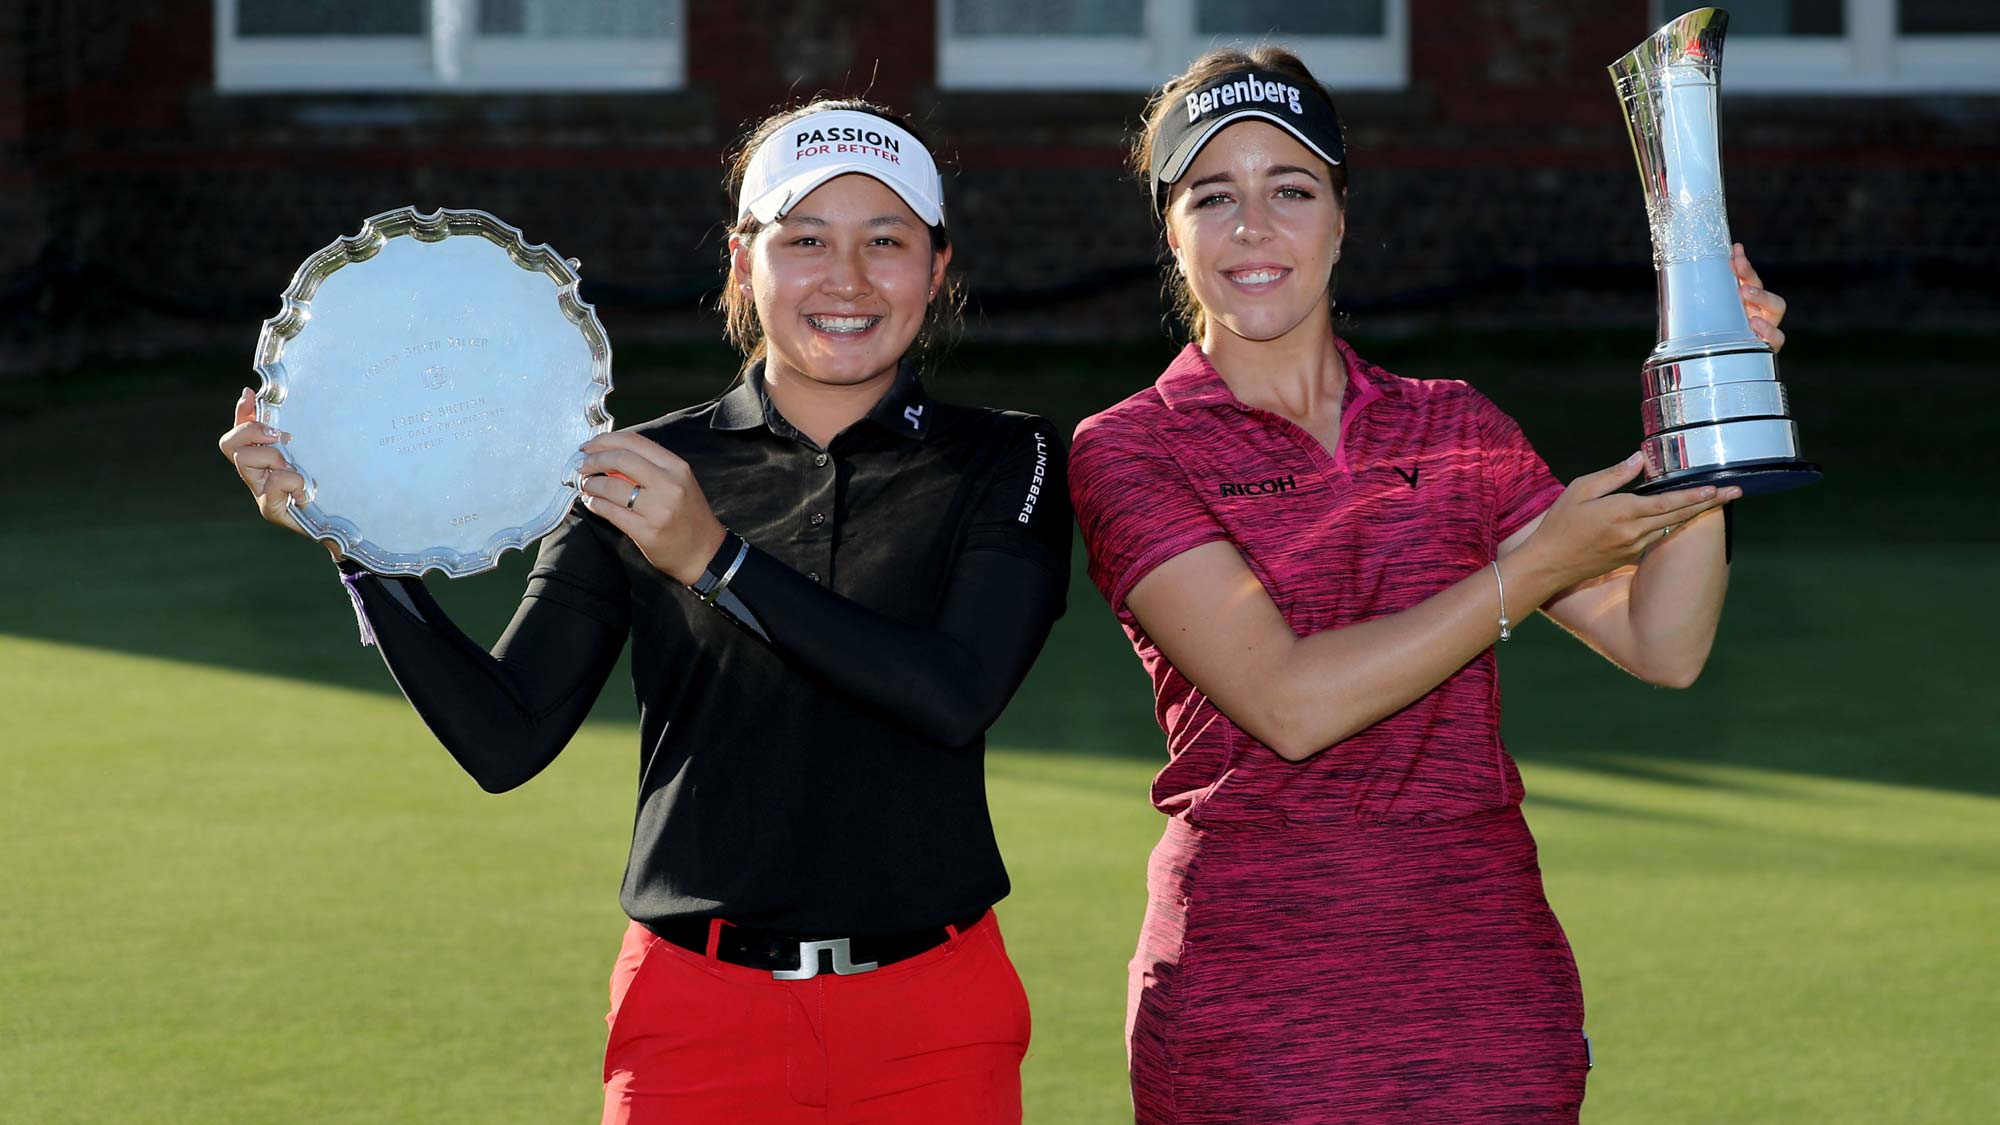 Georgia Hall of England holds the trophy after her victory with Atthaya Thitikul of Thailand the winner of the low amateur award in the final round of the Ricoh Women's British Open at Royal Lytham and St Annes Golf Club on August 5, 2018 in Lytham St Annes, England.